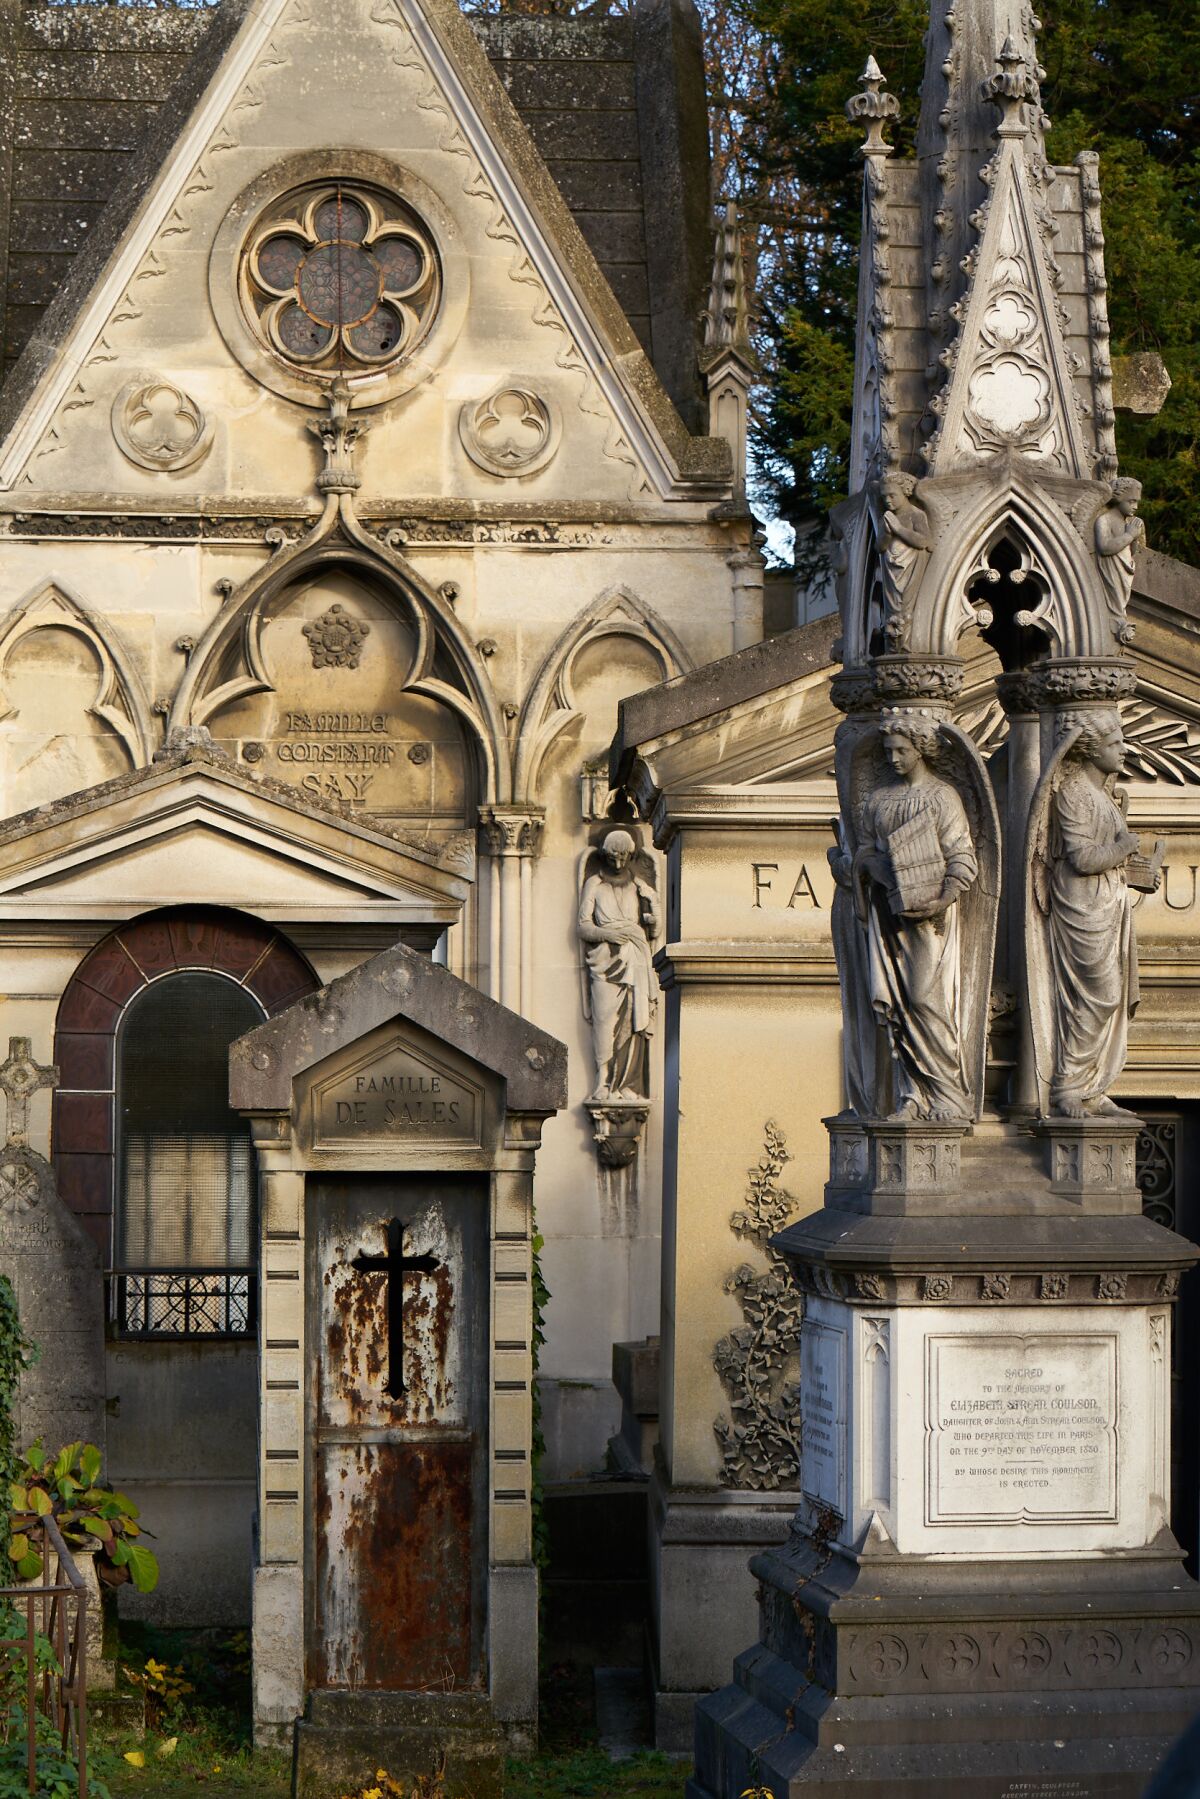 Père-Lachaise Cemetery, touted as the most visited cemetery in the world.